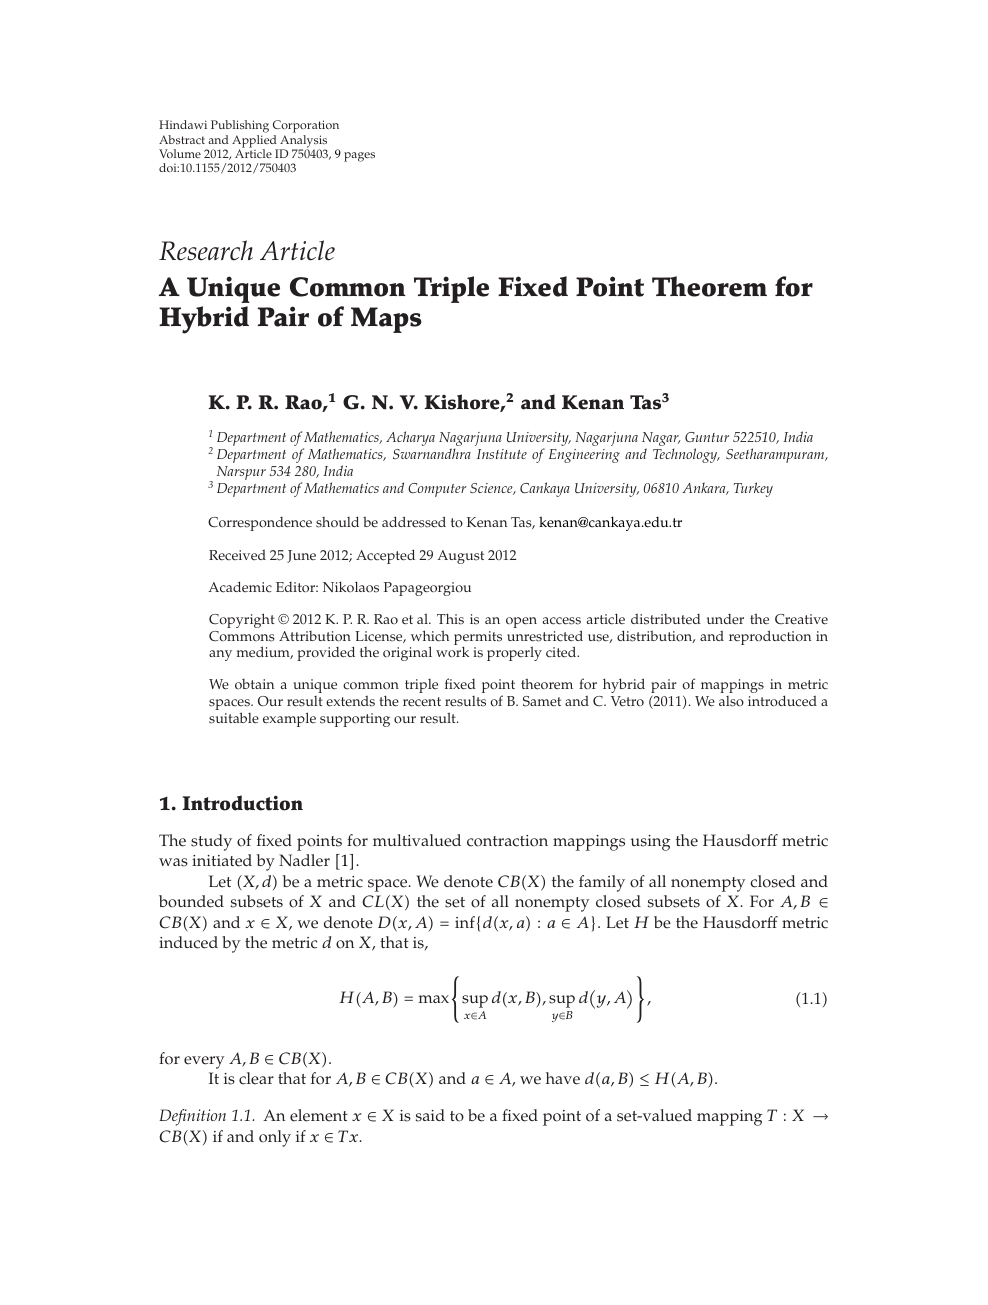 A Unique Common Triple Fixed Point Theorem For Hybrid Pair Of Maps Topic Of Research Paper In Mathematics Download Scholarly Article Pdf And Read For Free On Cyberleninka Open Science Hub